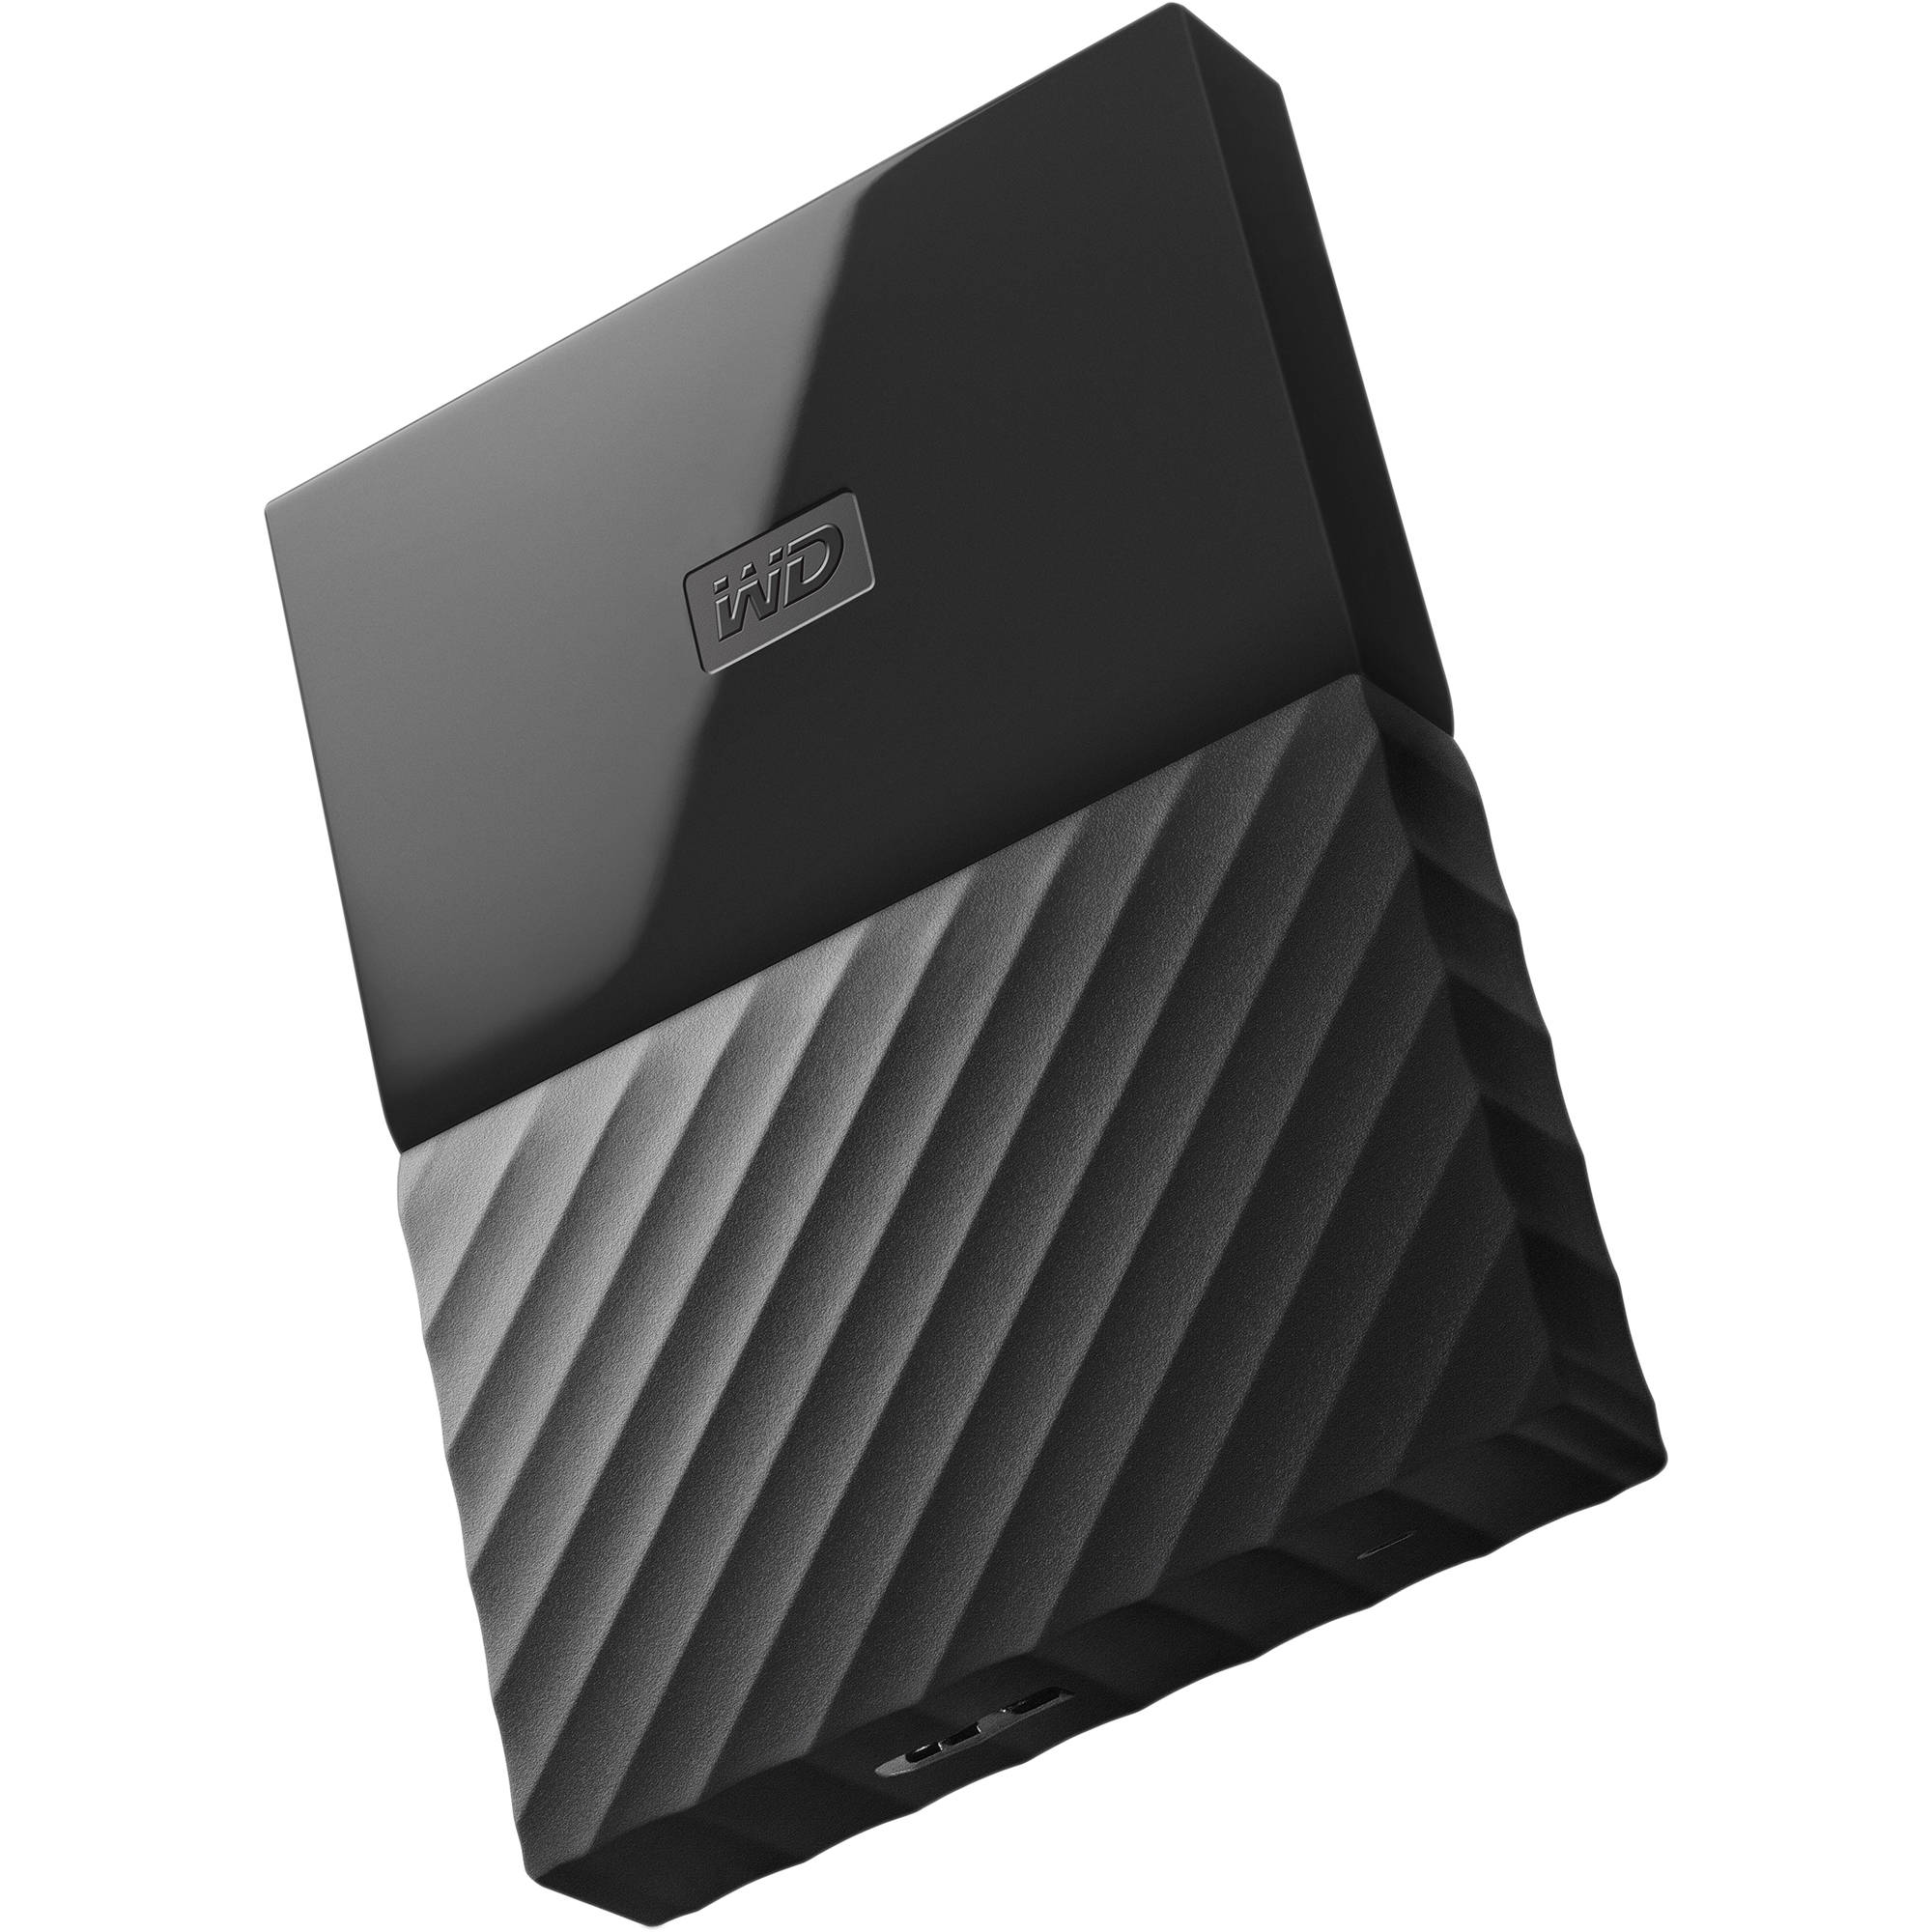 reformat my wd external hard drive for mac?